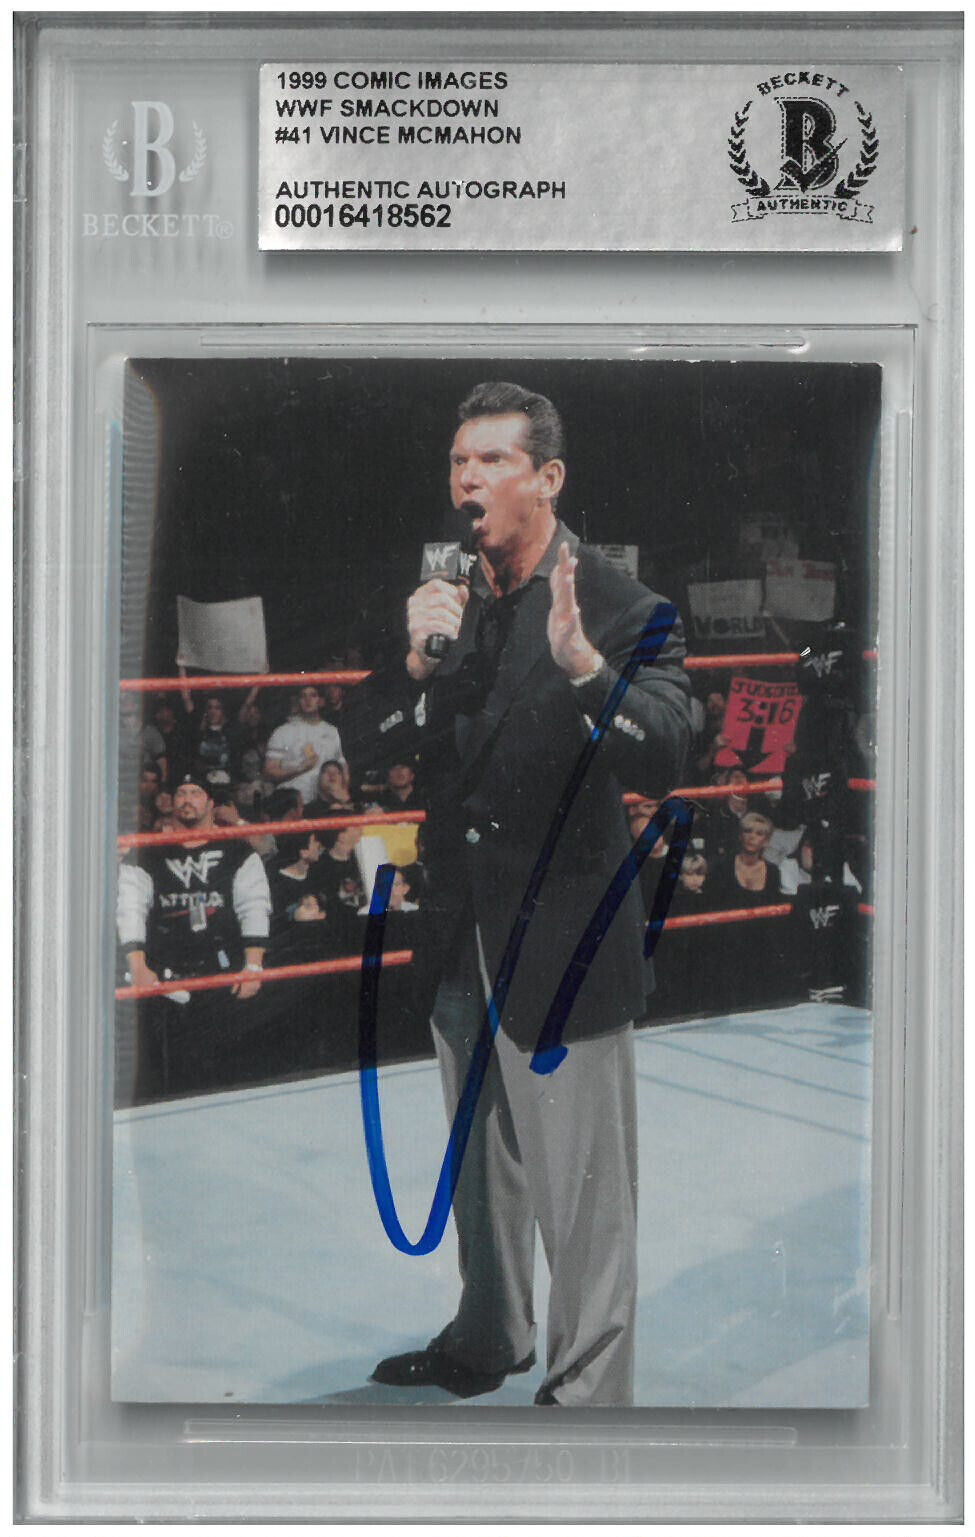 Vince McMahon Signed Autograph Slabbed WWF 1999 Comic Images Card Beckett BAS